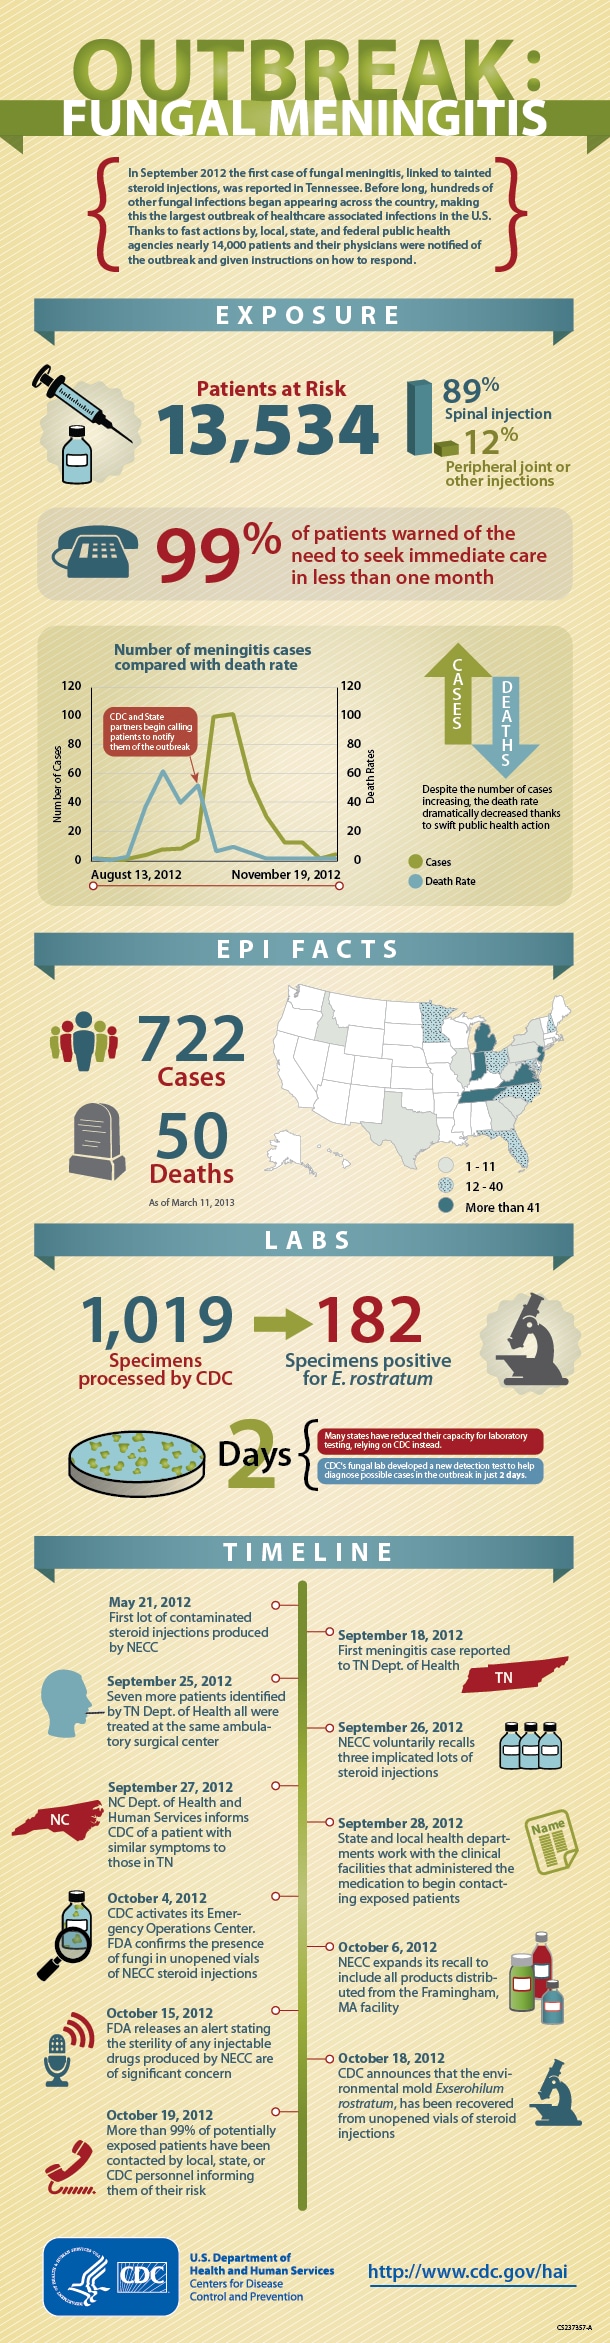 Fungal meningitis outbreak infographic. Full text description available at: http://www.cdc.gov/hai/outbreaks/infographic-read-access.html